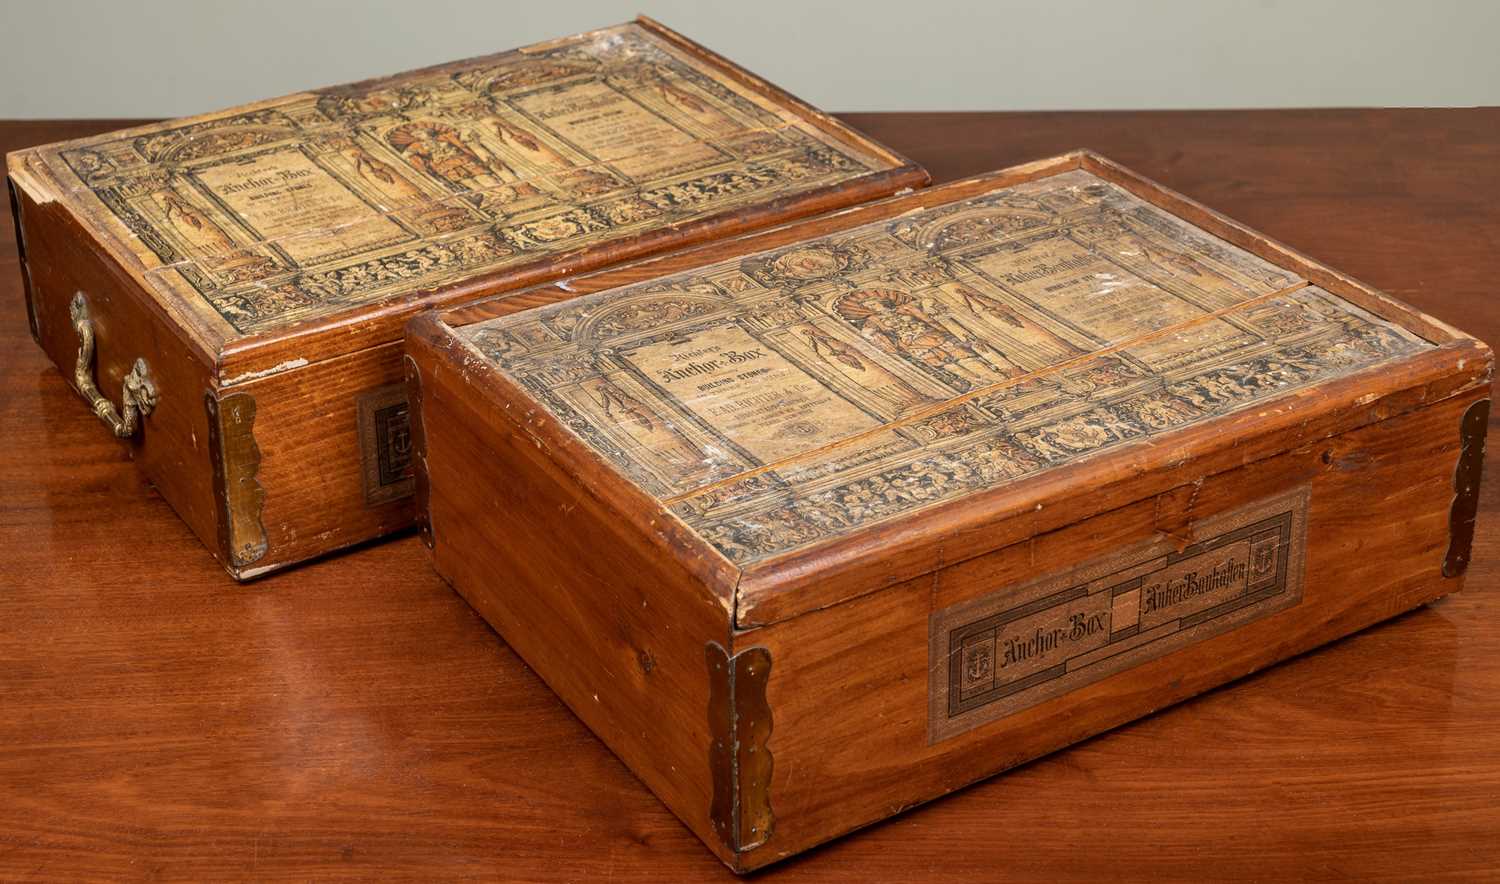 Two 19th century pine-cased sets of Richter's Anchor Box Building Stones, each box with three pull-